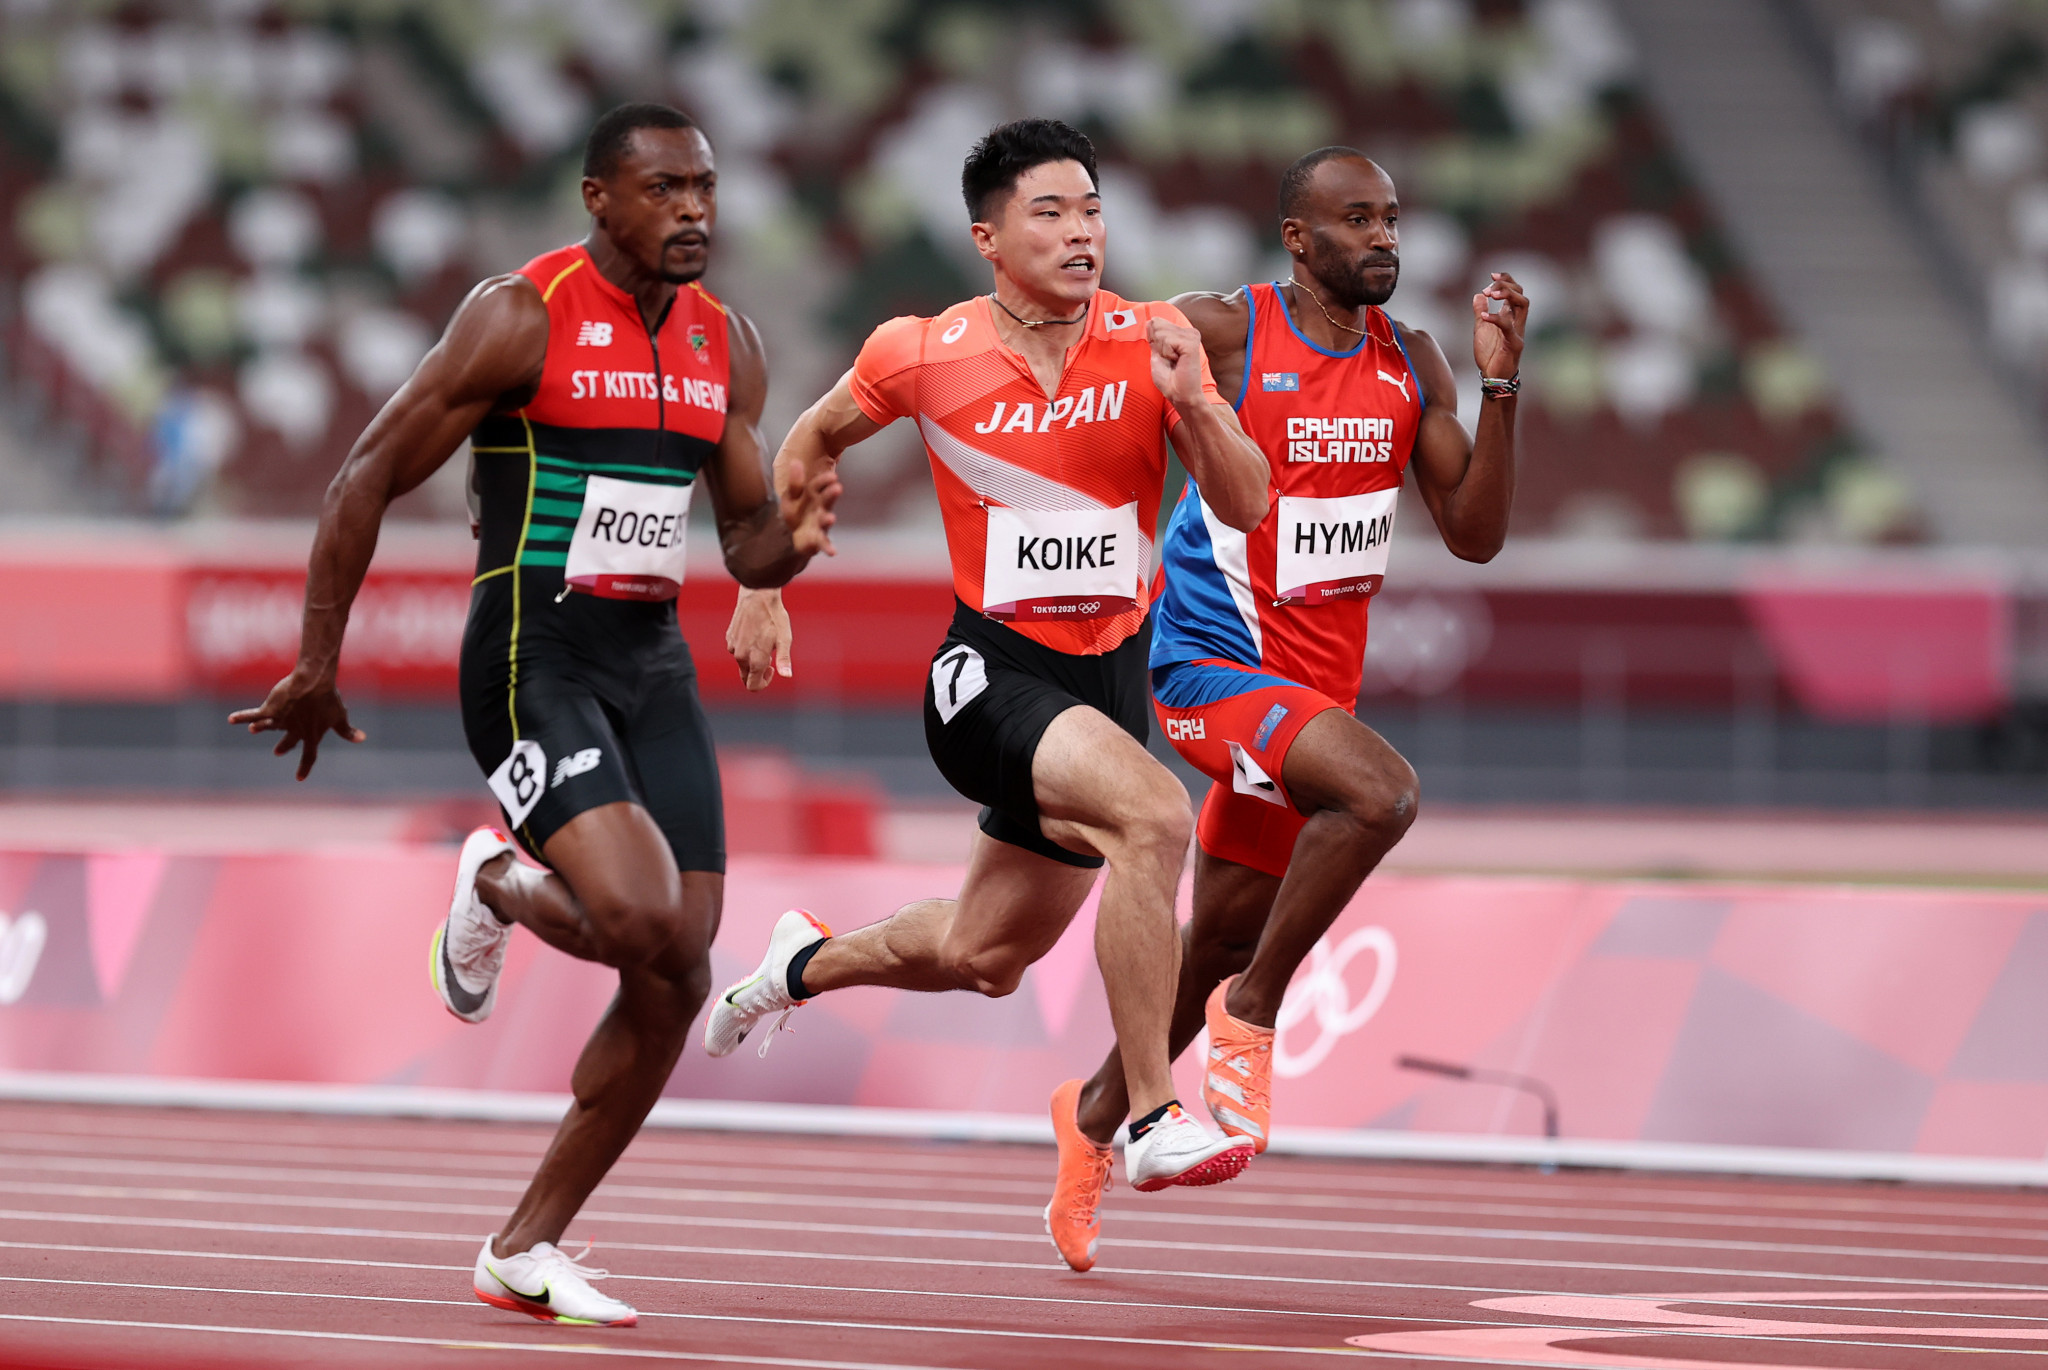 Jason Rogers reached the Tokyo 2020 Olympic semi-finals over 100m and the Gold Coast 2018 final ©Getty Images